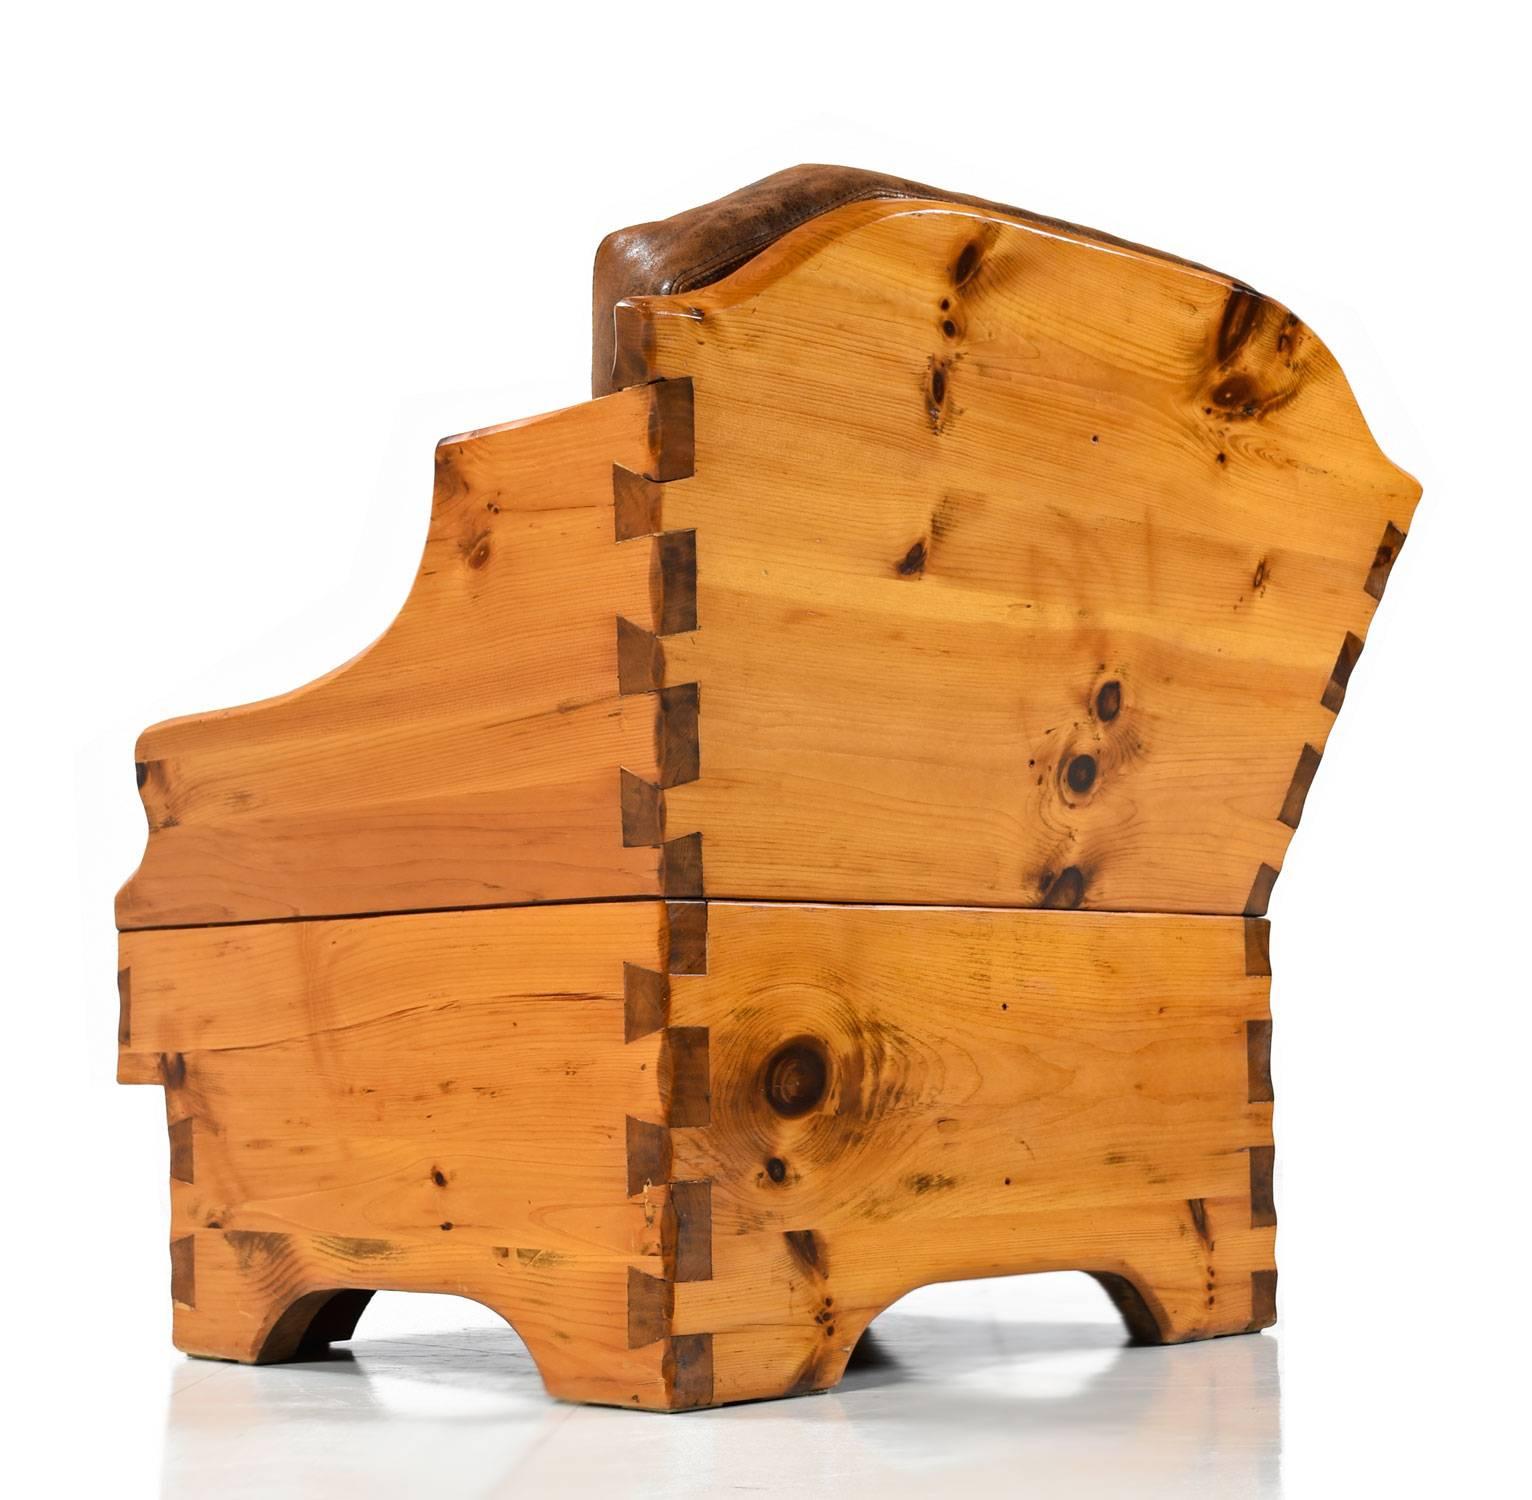 Restored solid pine handcrafted, one of a kind armchair. The masterful craftsmanship is left exposed as a design element. Large dovetail joints are a darker tone, enhancing their presence. The thick planks of knotty pine are sure to last many more